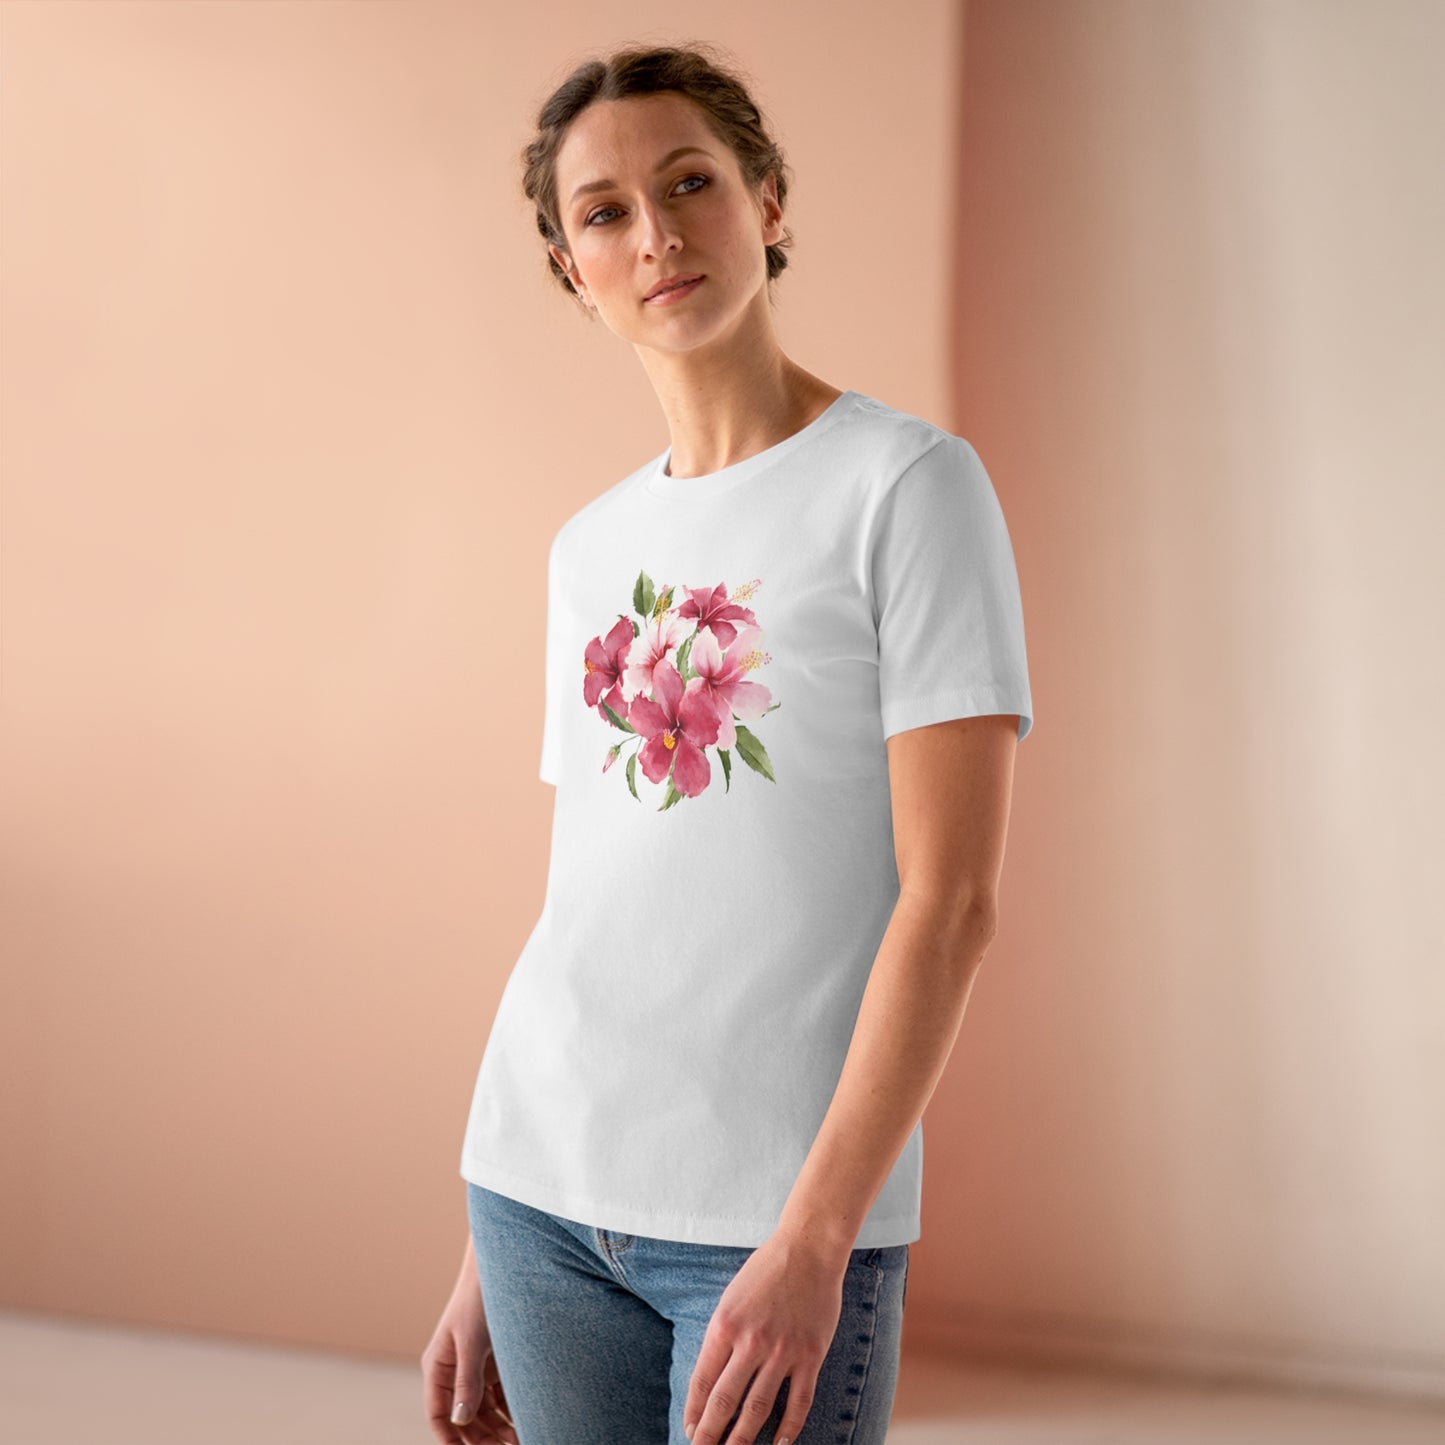 Mock up of a woman wearing the white t-shirt